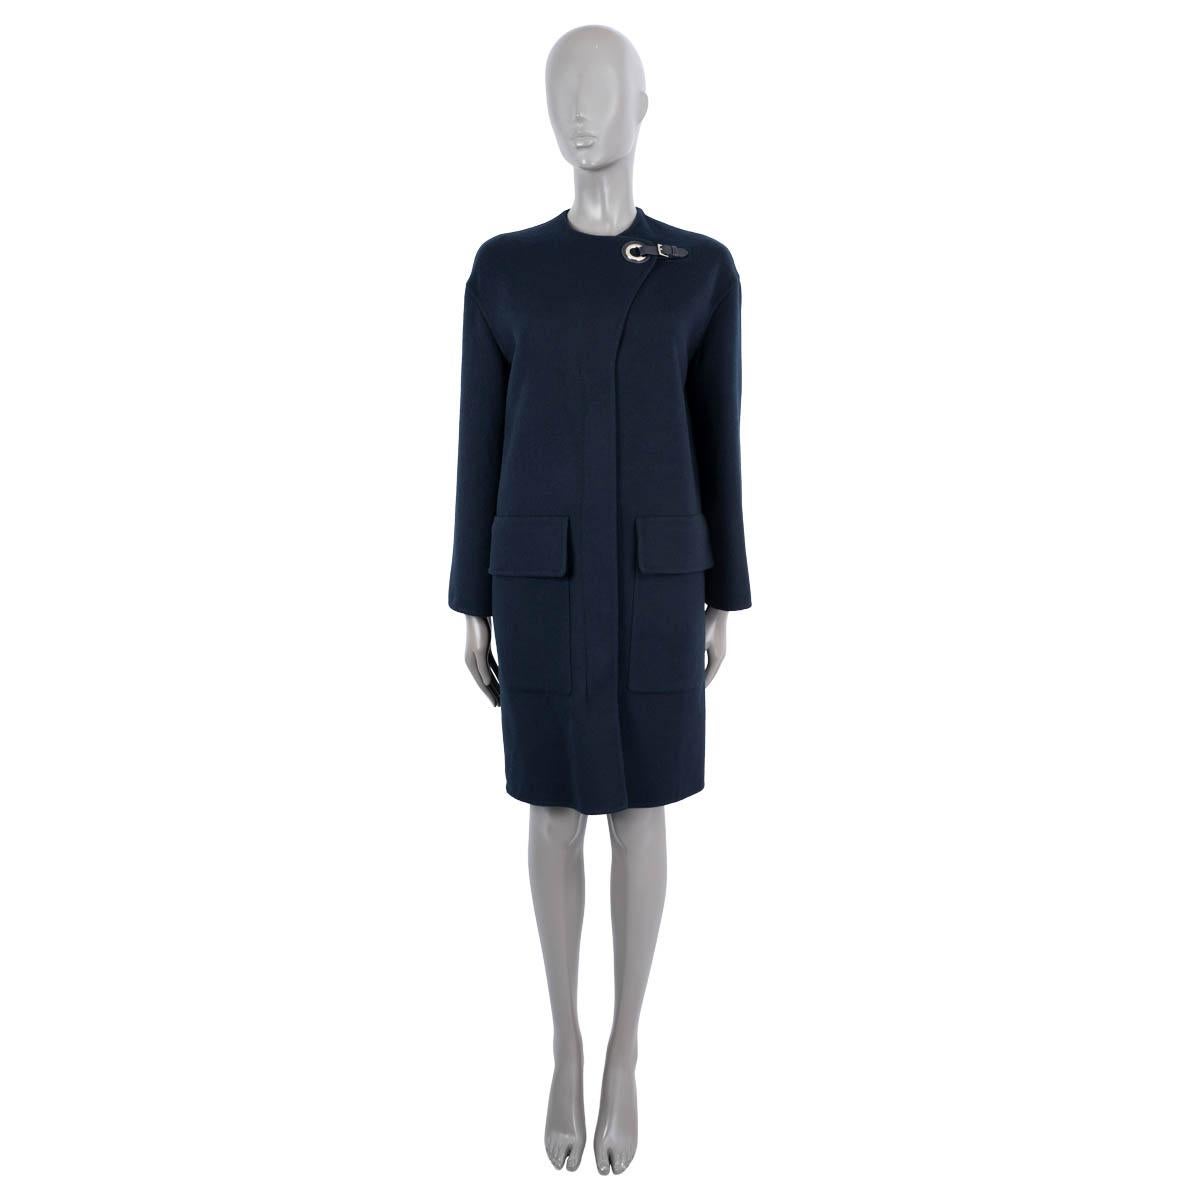 100% authentic Hermès coat in navy blue cashmere (100%). Features two patch pockets on the front slit on the back and silver eyelet. Closes with concealed silver zipper on the front. Unlined. Has been worn and is in excellent condition.

2022